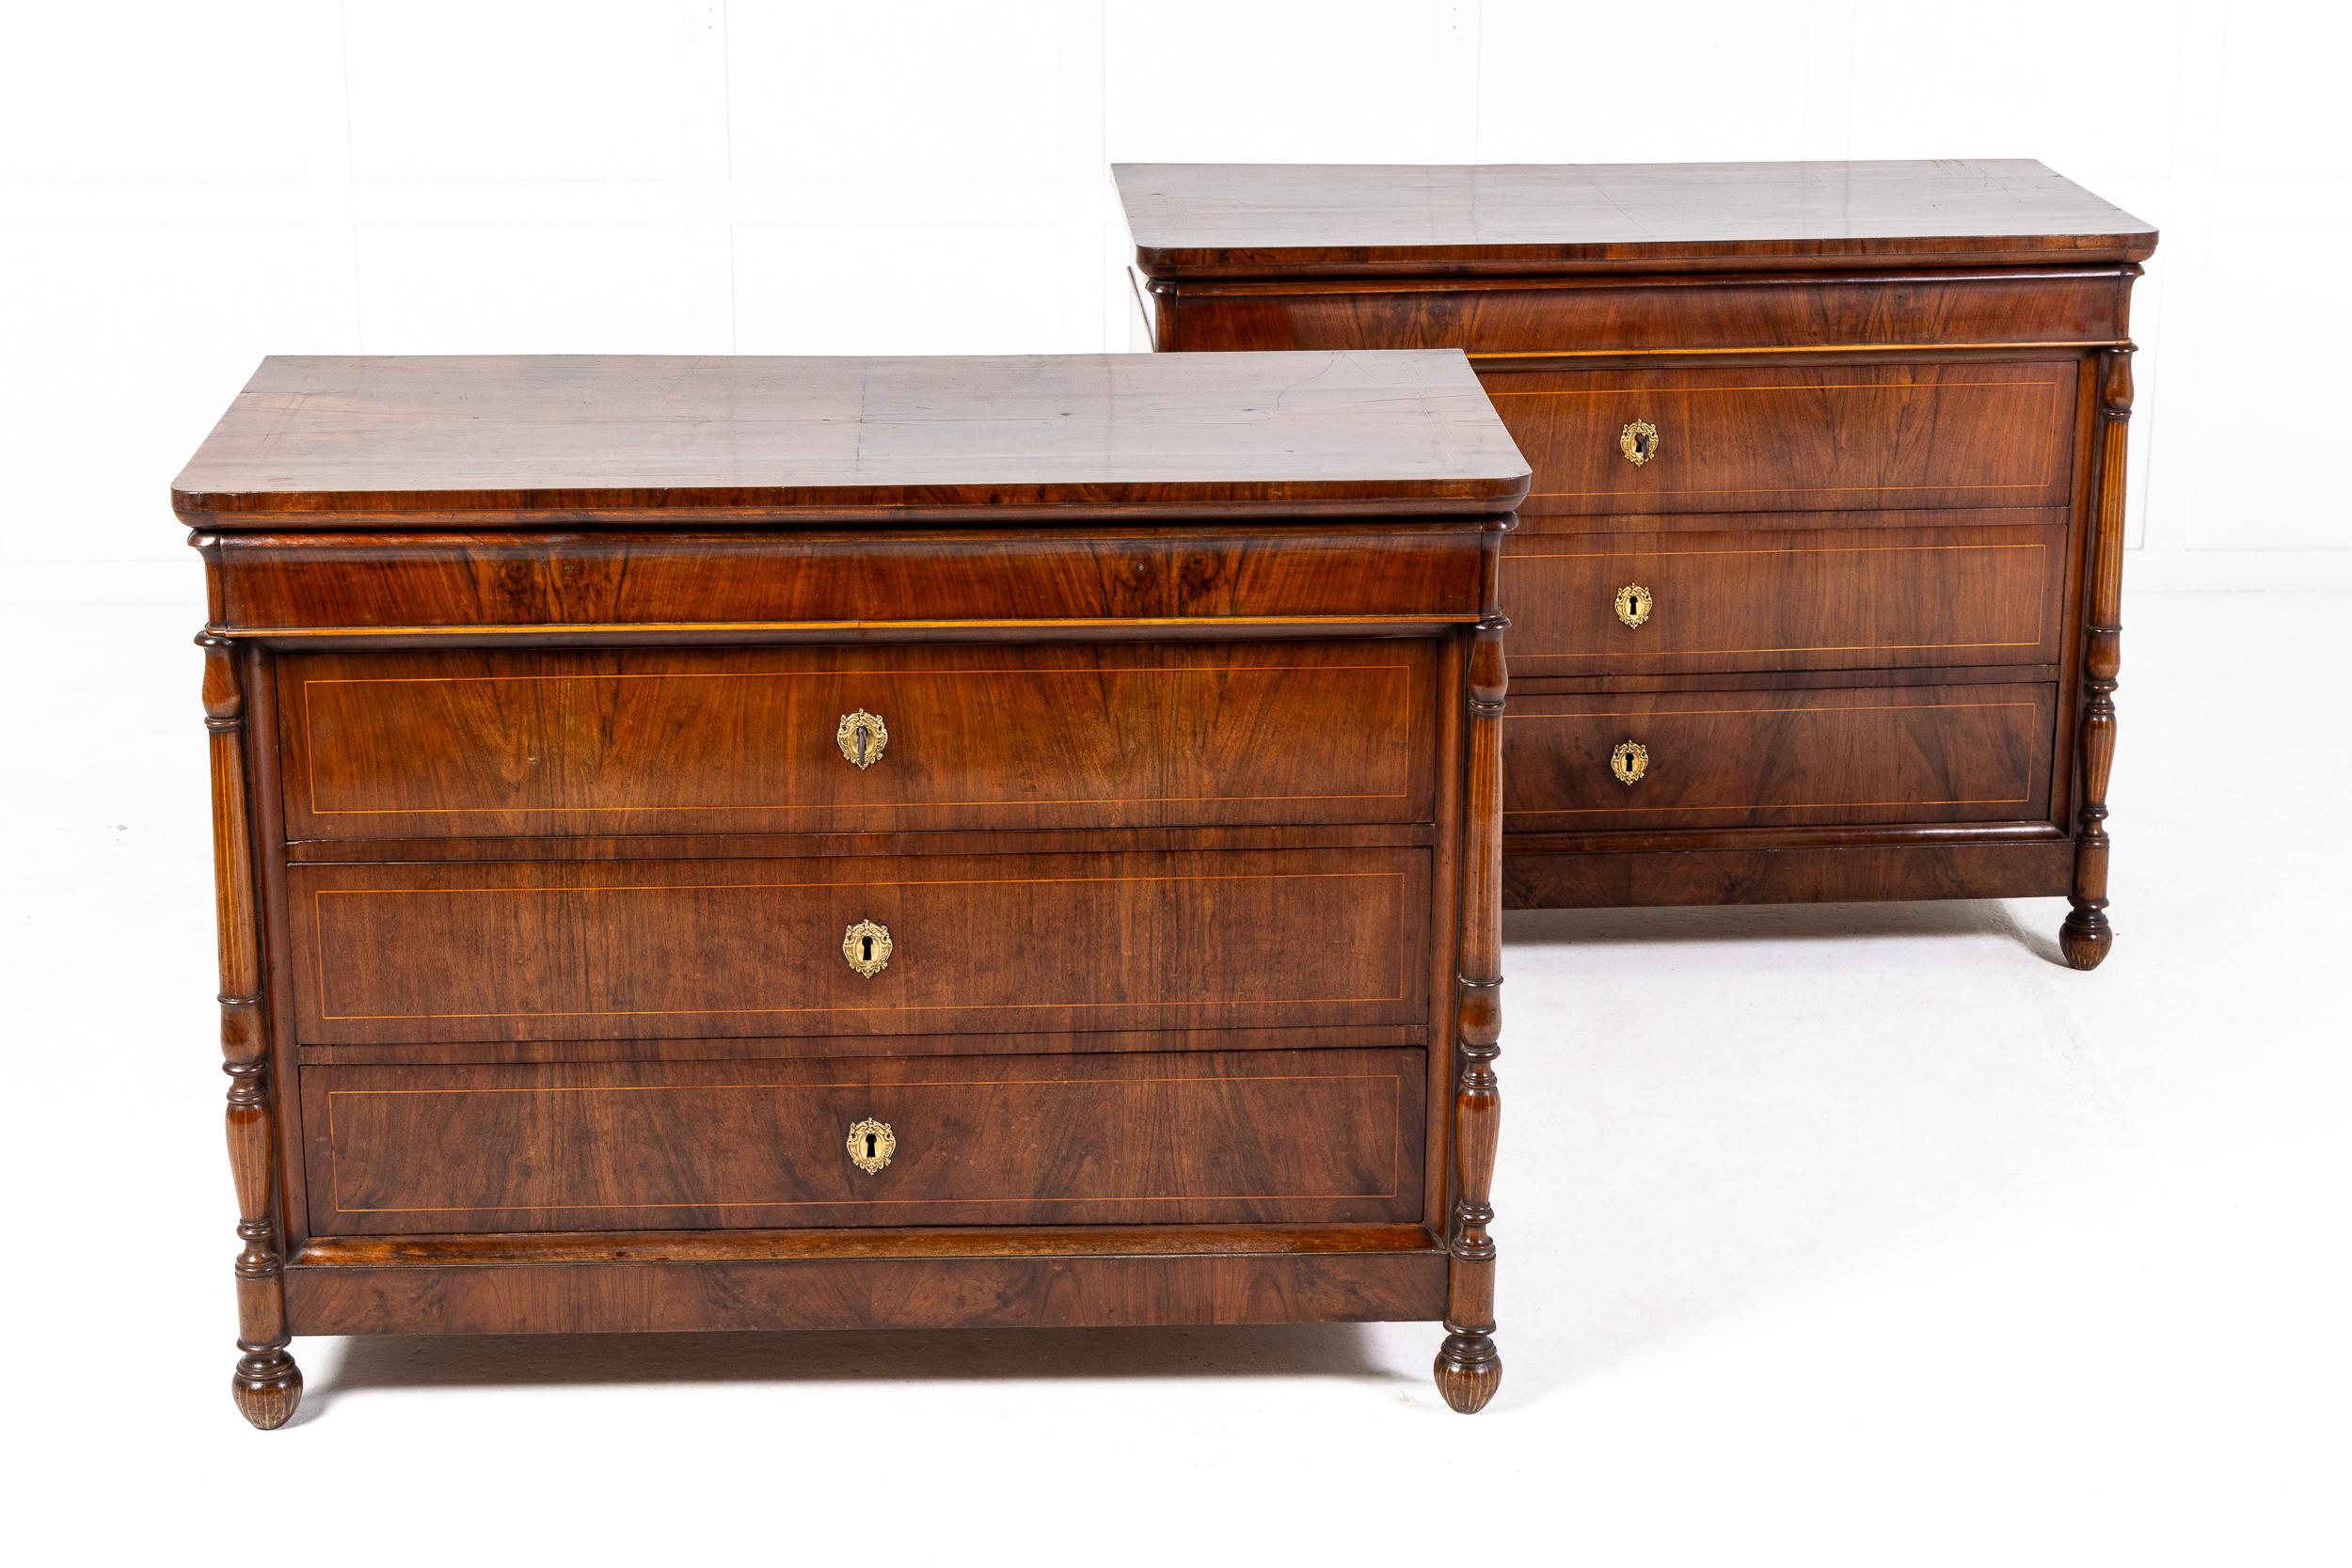 A Very Fine Pair of Early 19th Century Italian Walnut Commodes c.1820

Of broadly rectangular shape but with sophisticated detailing throughout, these pieces employ walnut veneers of the finest quality. The bookmatched and crossbanded tops of these